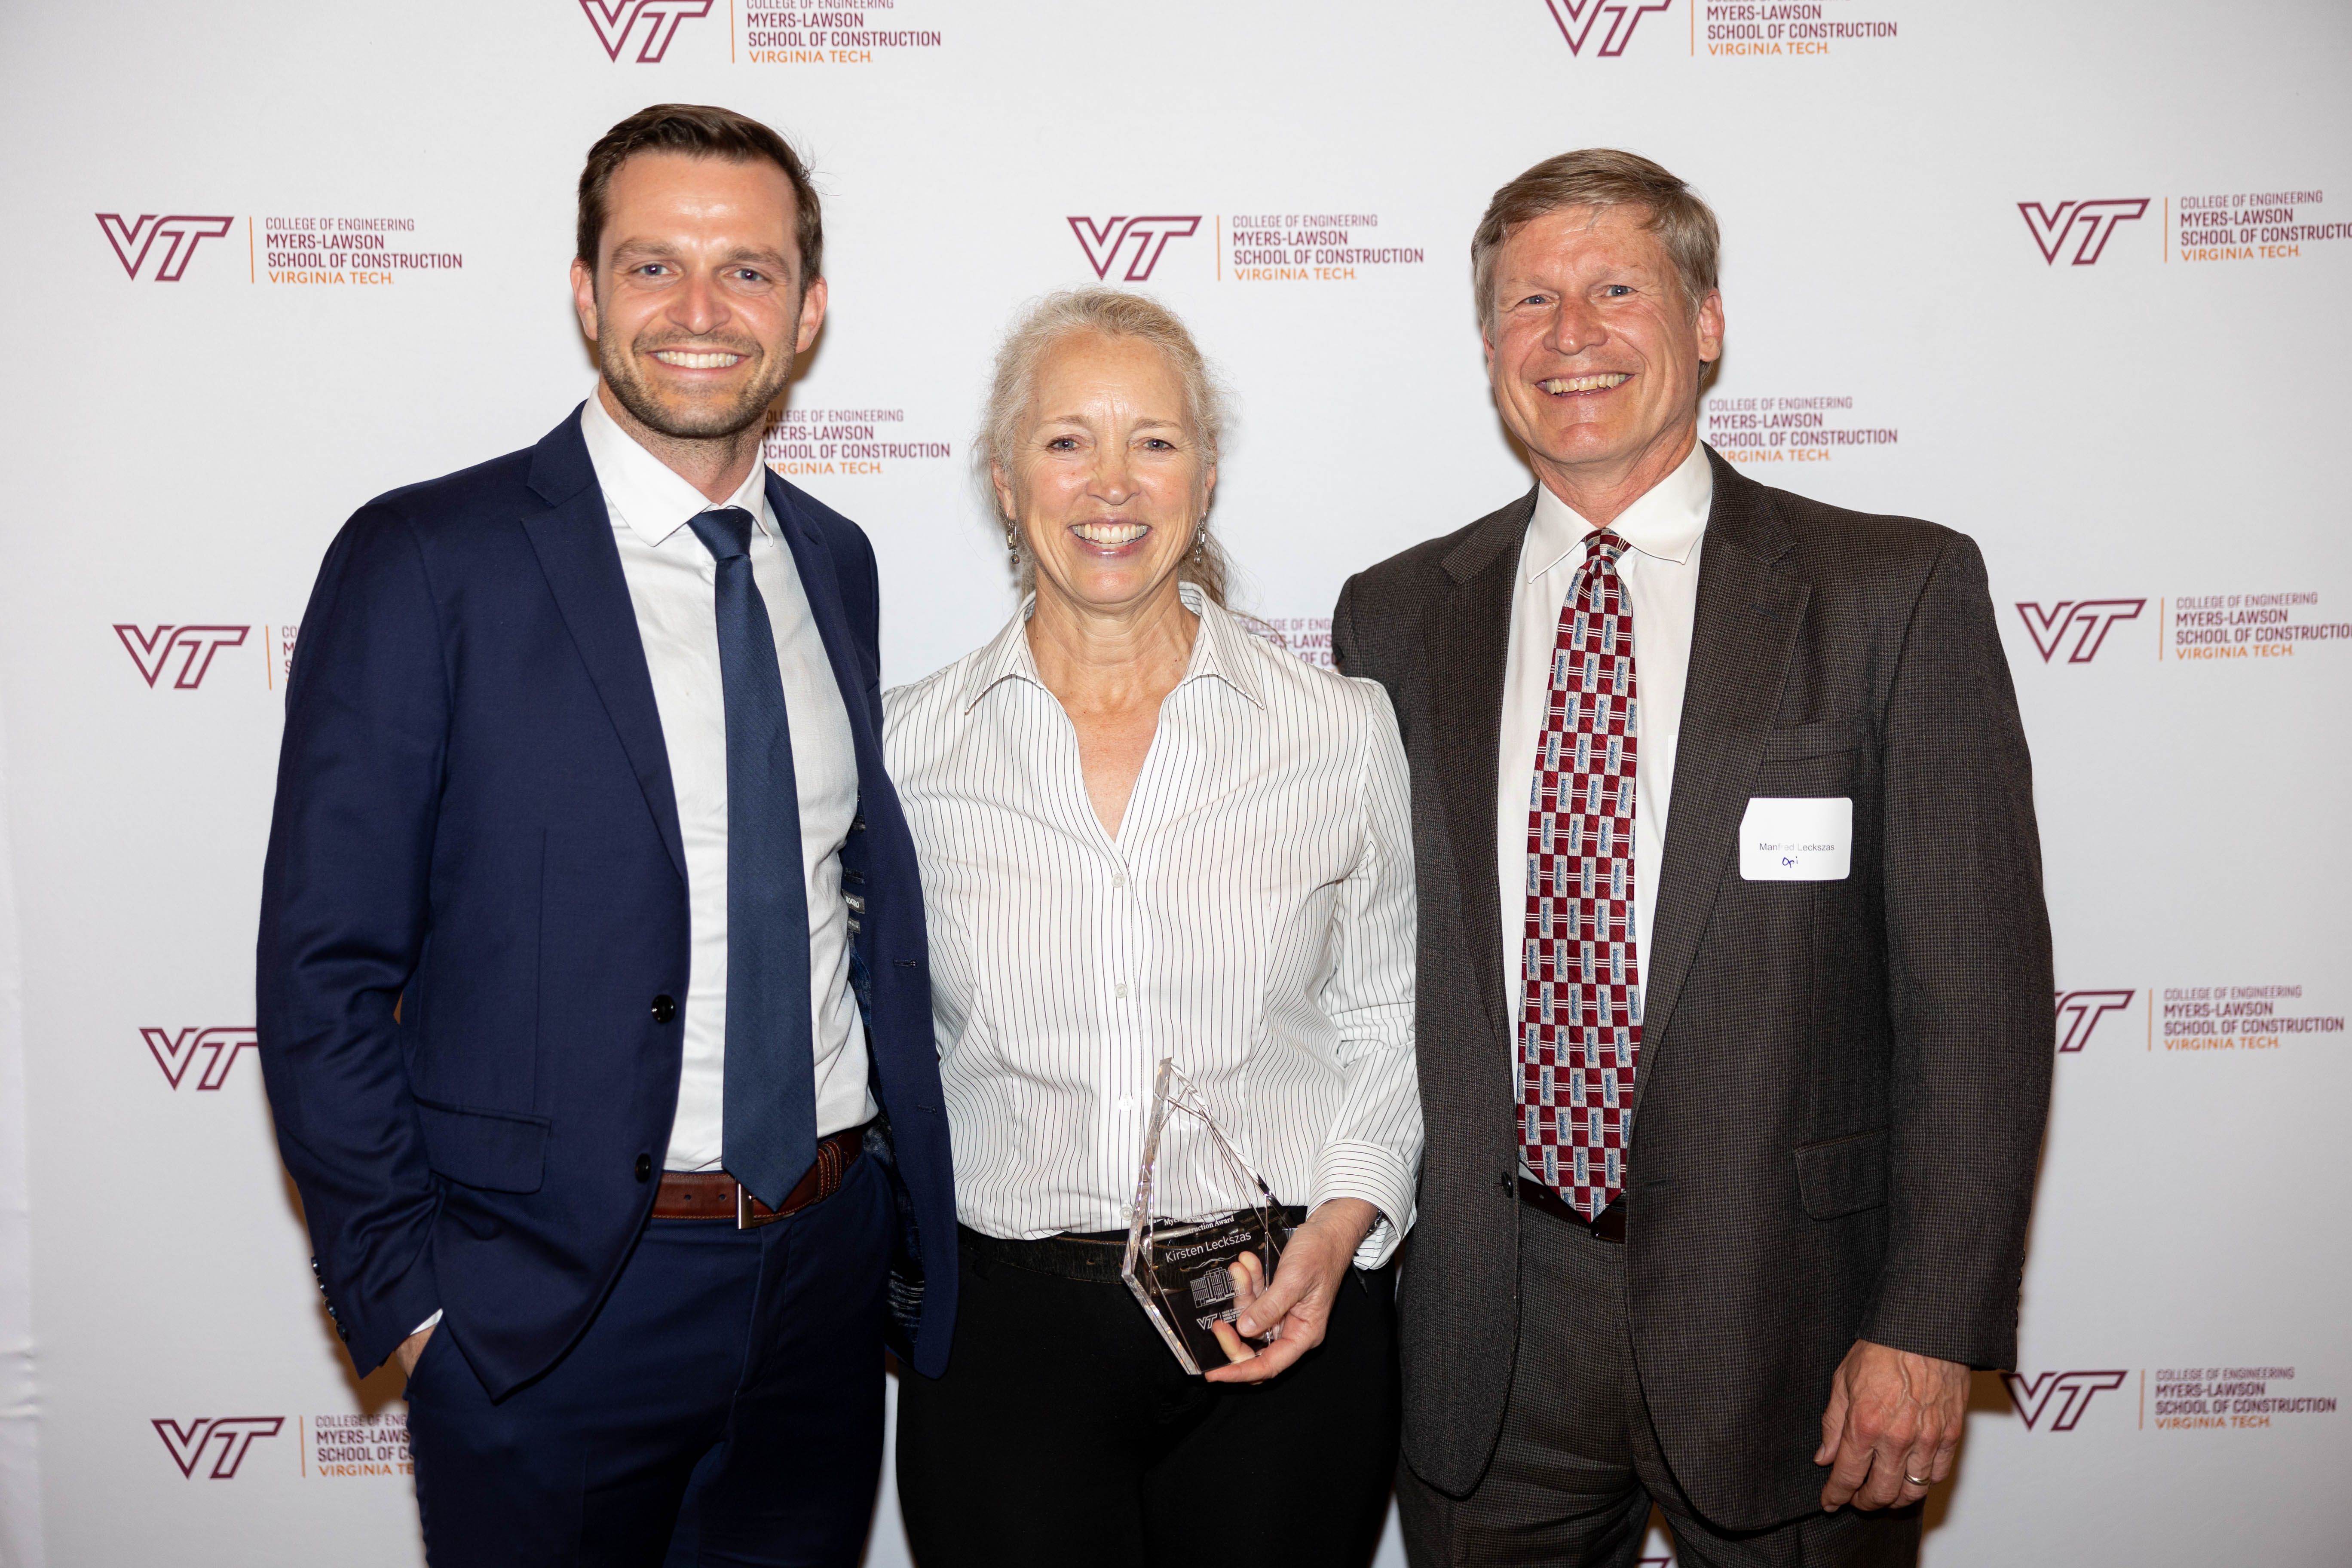 Kirsten Leckszas '88 (middle) with family during Awards Ceremony. Photo by Will Drew for Virginia Tech.